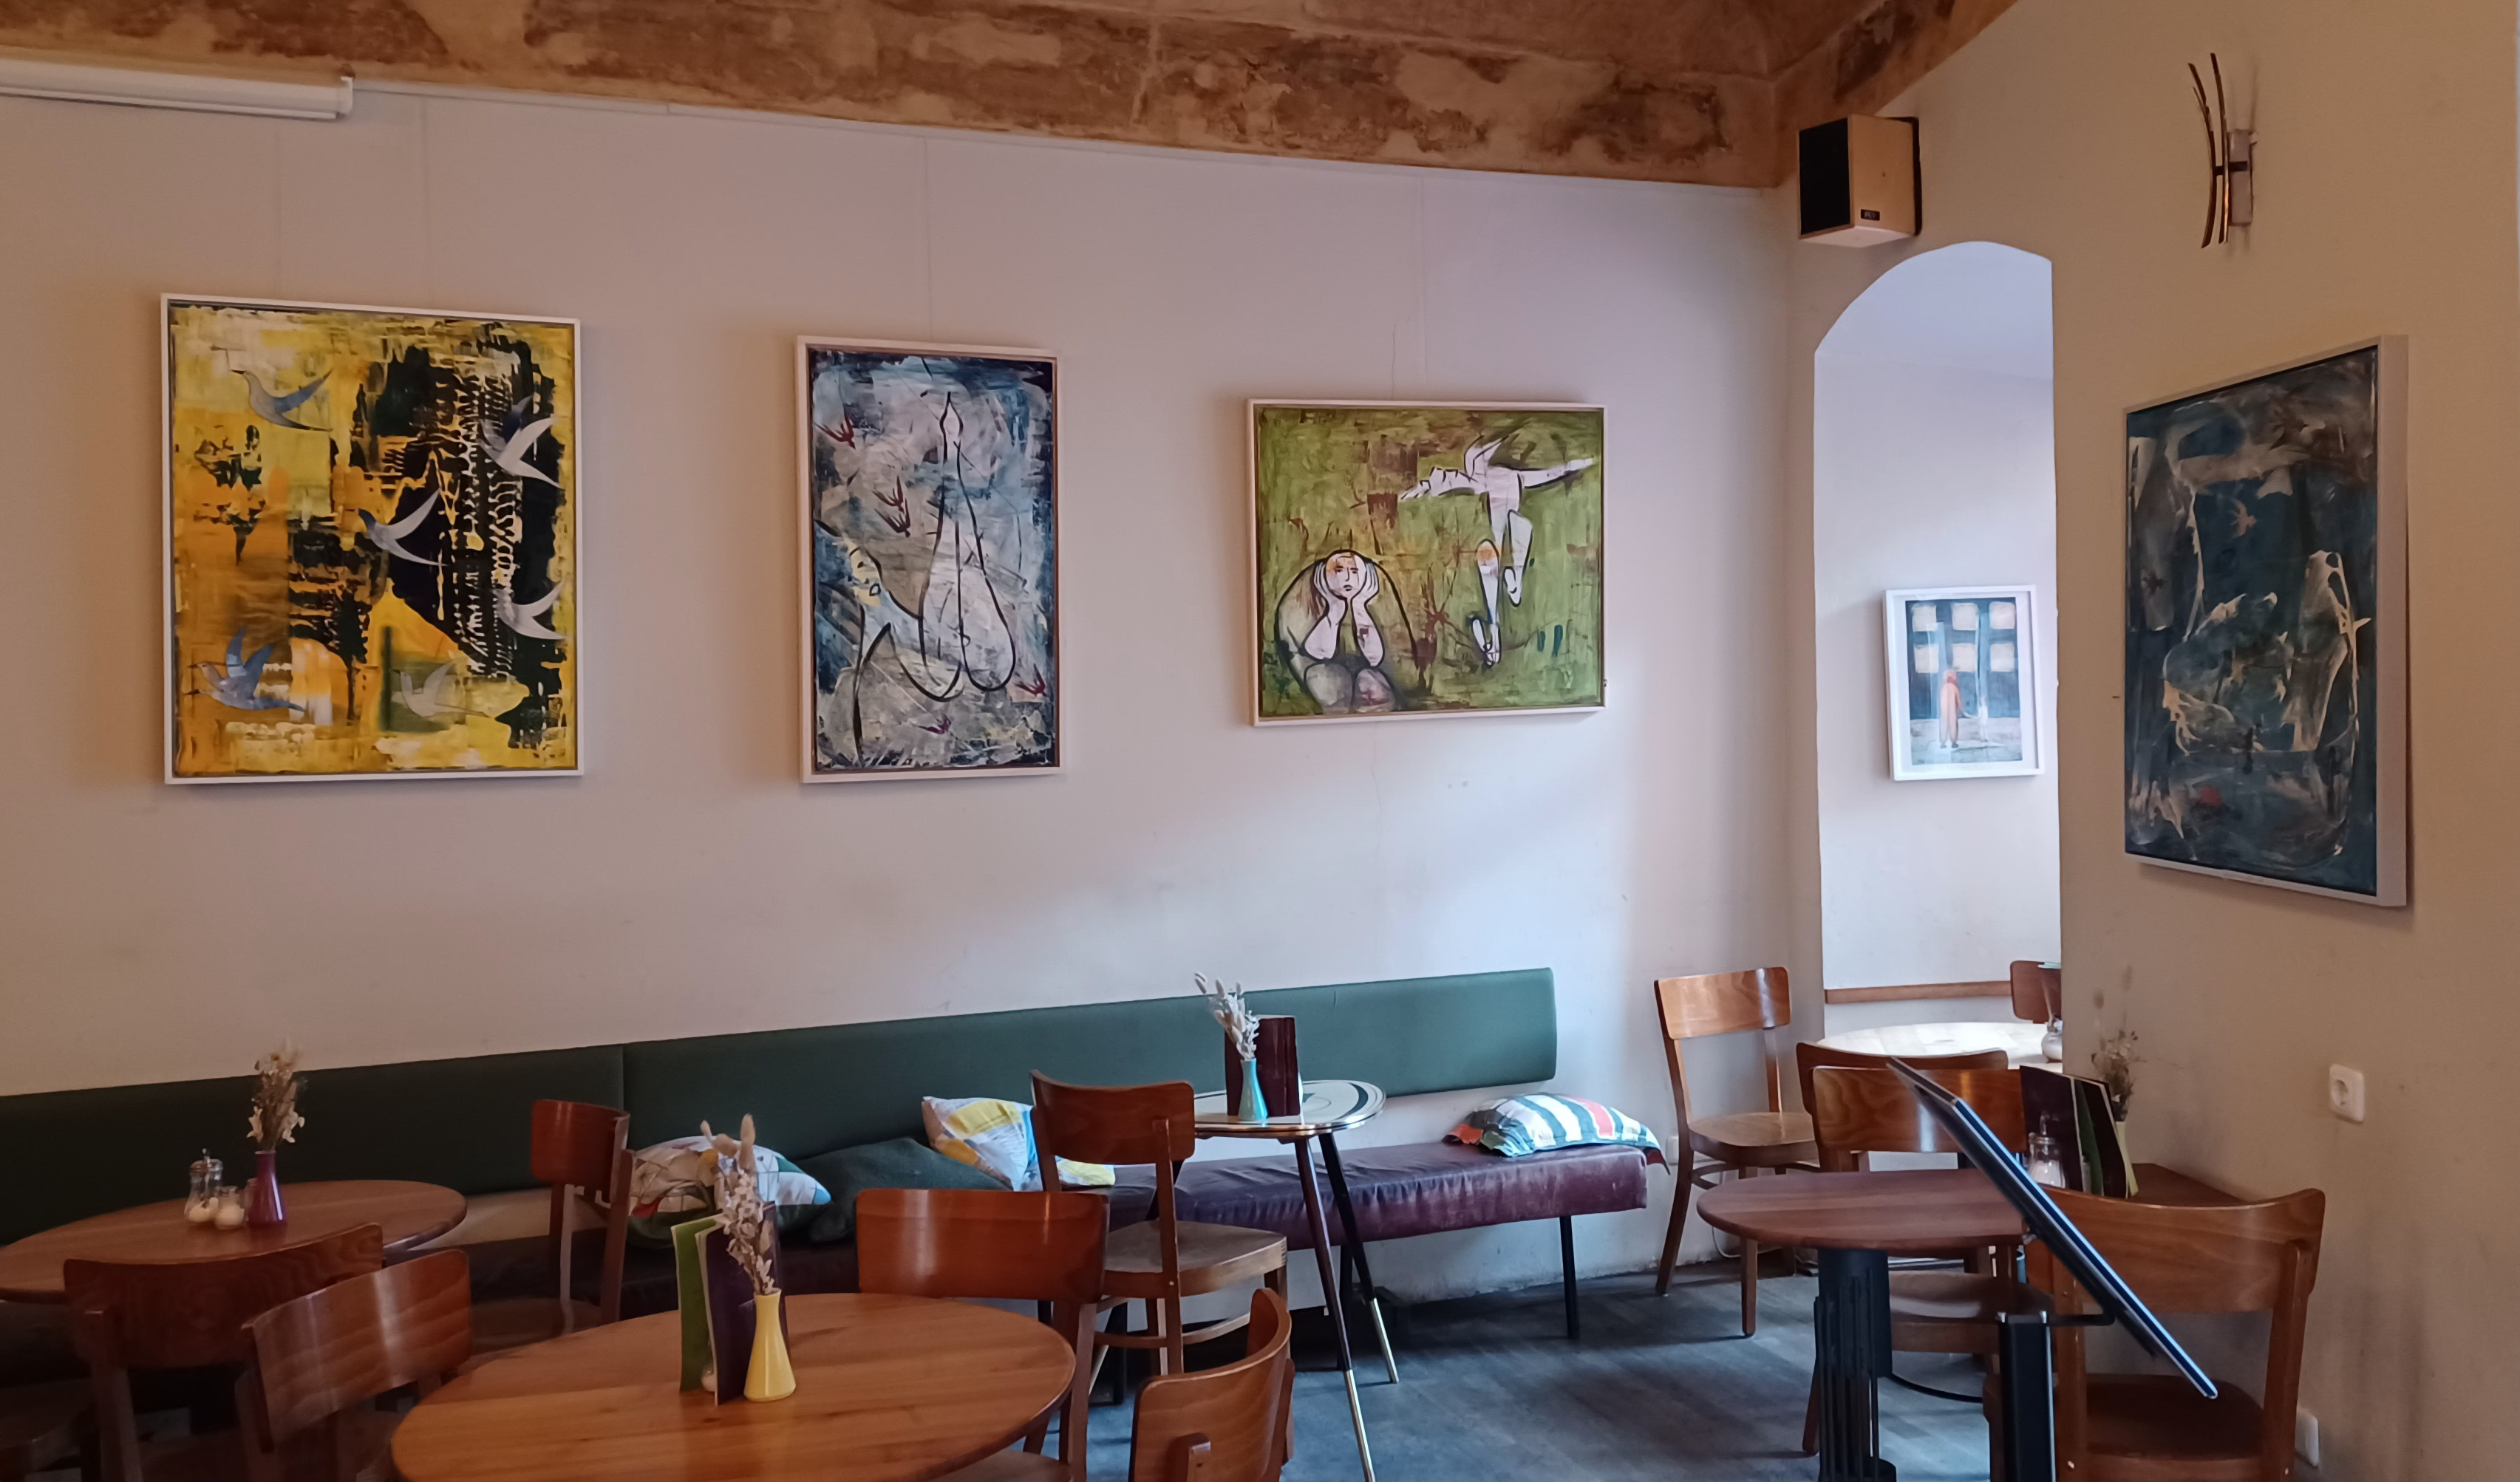 Ausstellung Cafe Lila
Rote-Hahnengasse 2





